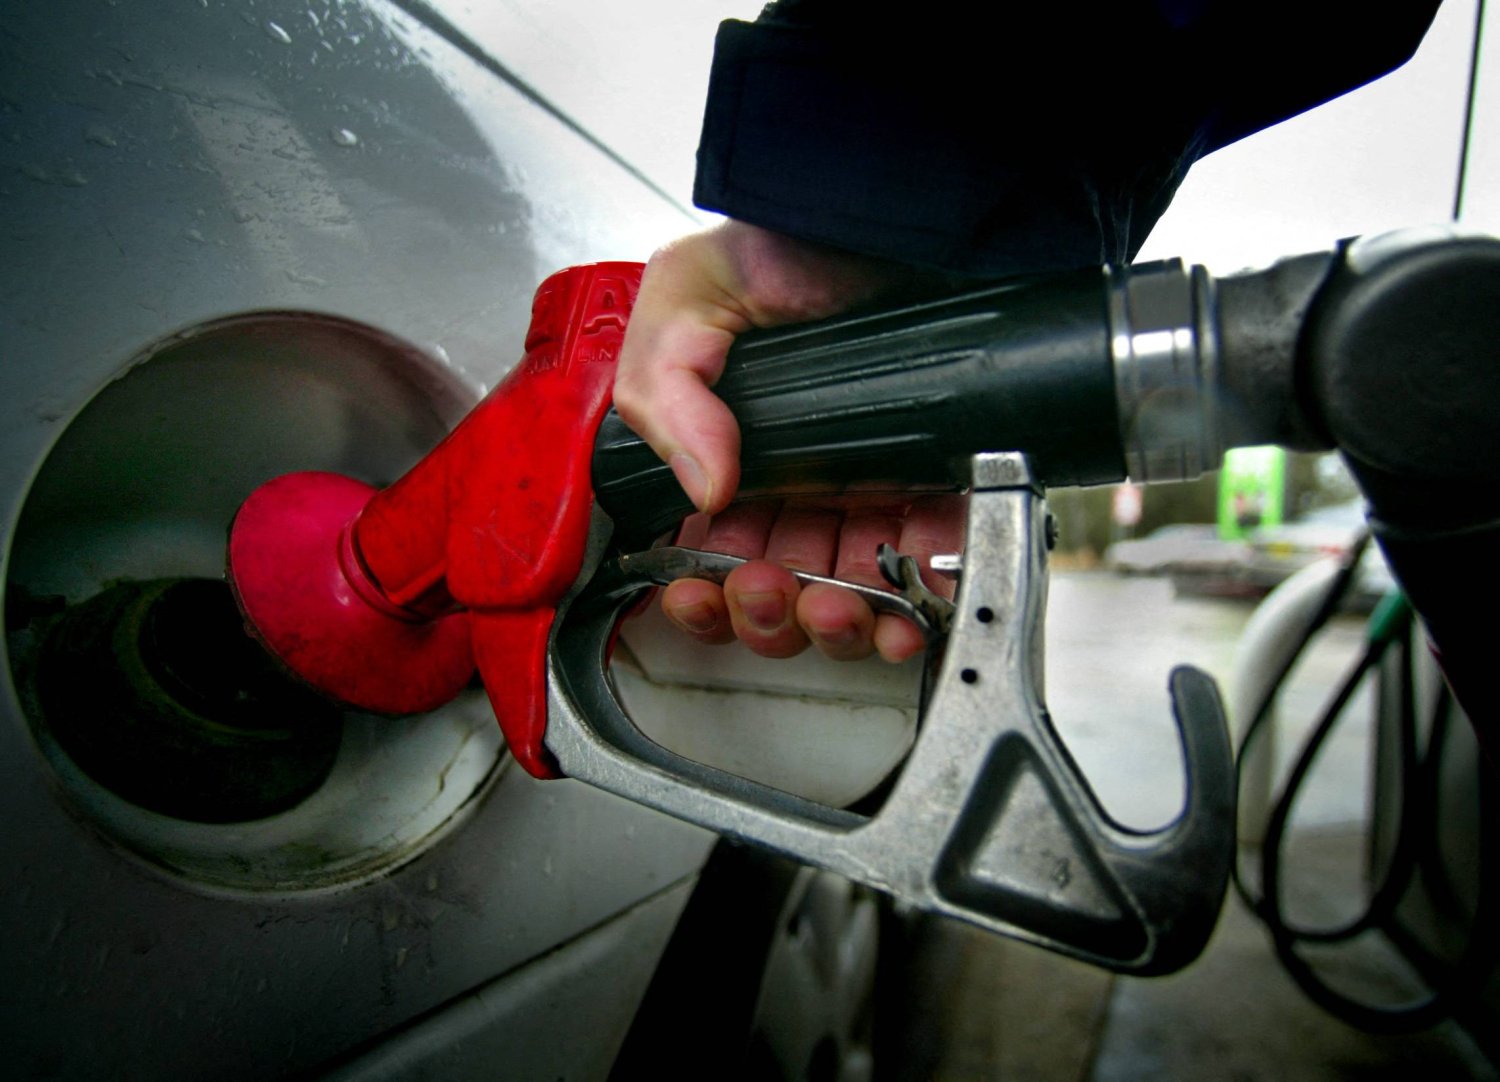 FILE PHOTO: A motorist fills a car with fuel at a petrol station in Sydney August 18, 2004. REUTERS